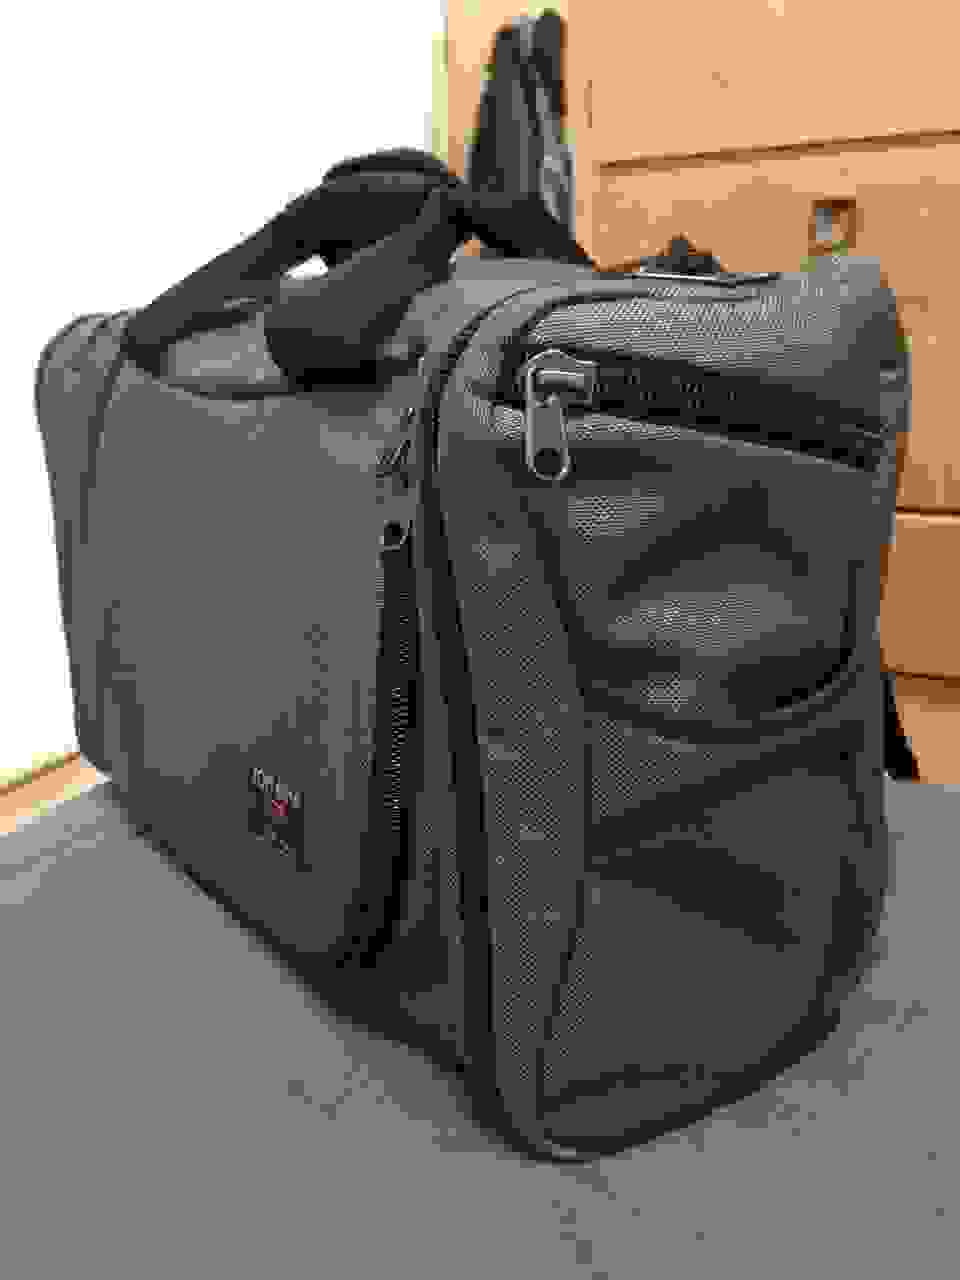 The Tom Bihn Aeronaut: Probably the best duffel bag for carry-on-only ...